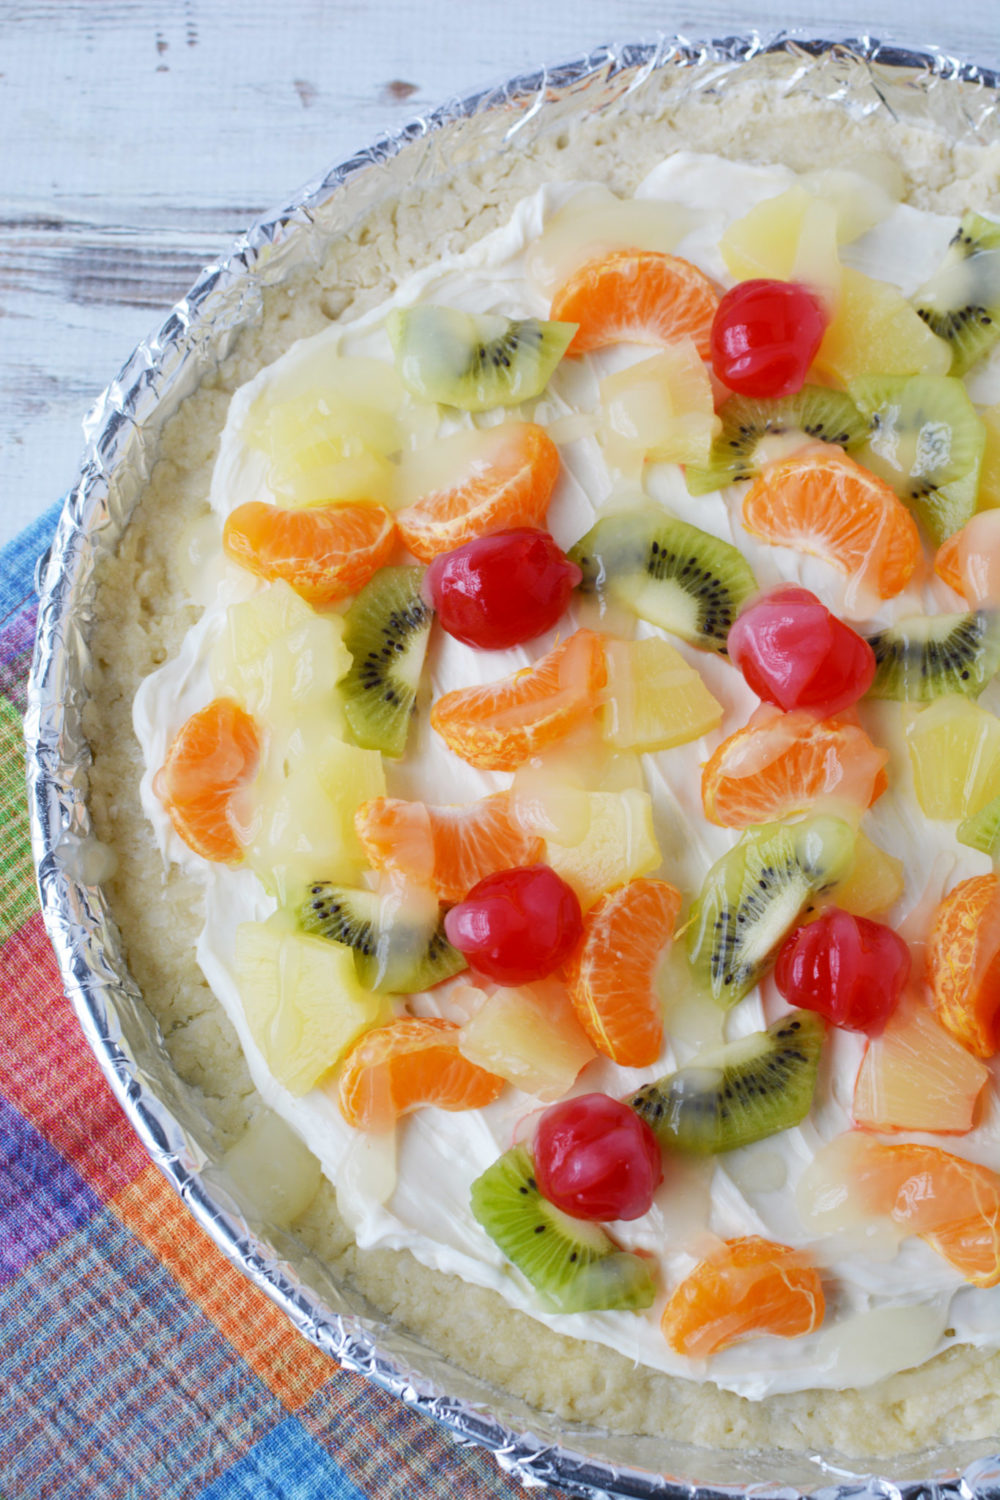 This Easy Fruit Pizza Recipe for Summertime is going to be a HIT at your next backyard barbecue or family dinner! 